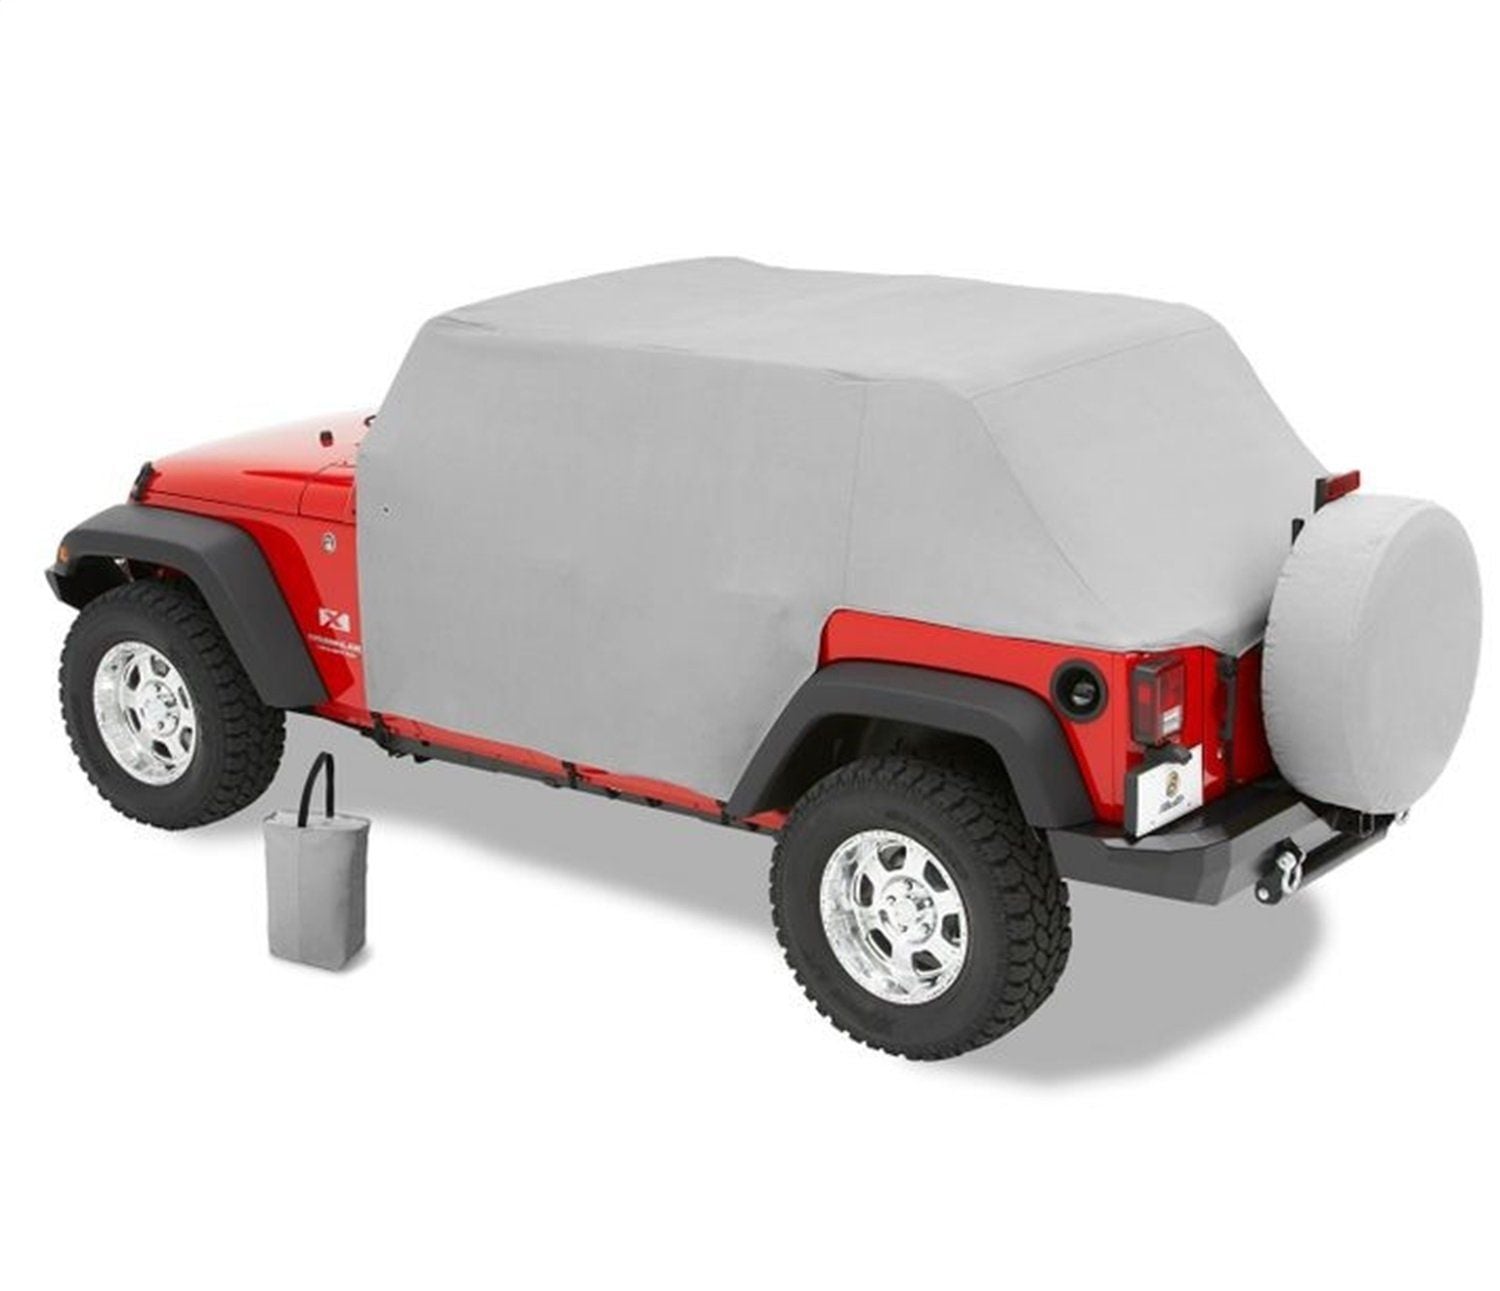 Accessories - Bestop 81041-09 Charcoal All Weather Trail Cover for 2007-2018 Wrangler JK Unlimited - New - 2007 to 2018 Jeep Wrangler - Pittsburgh, PA 15057, United States